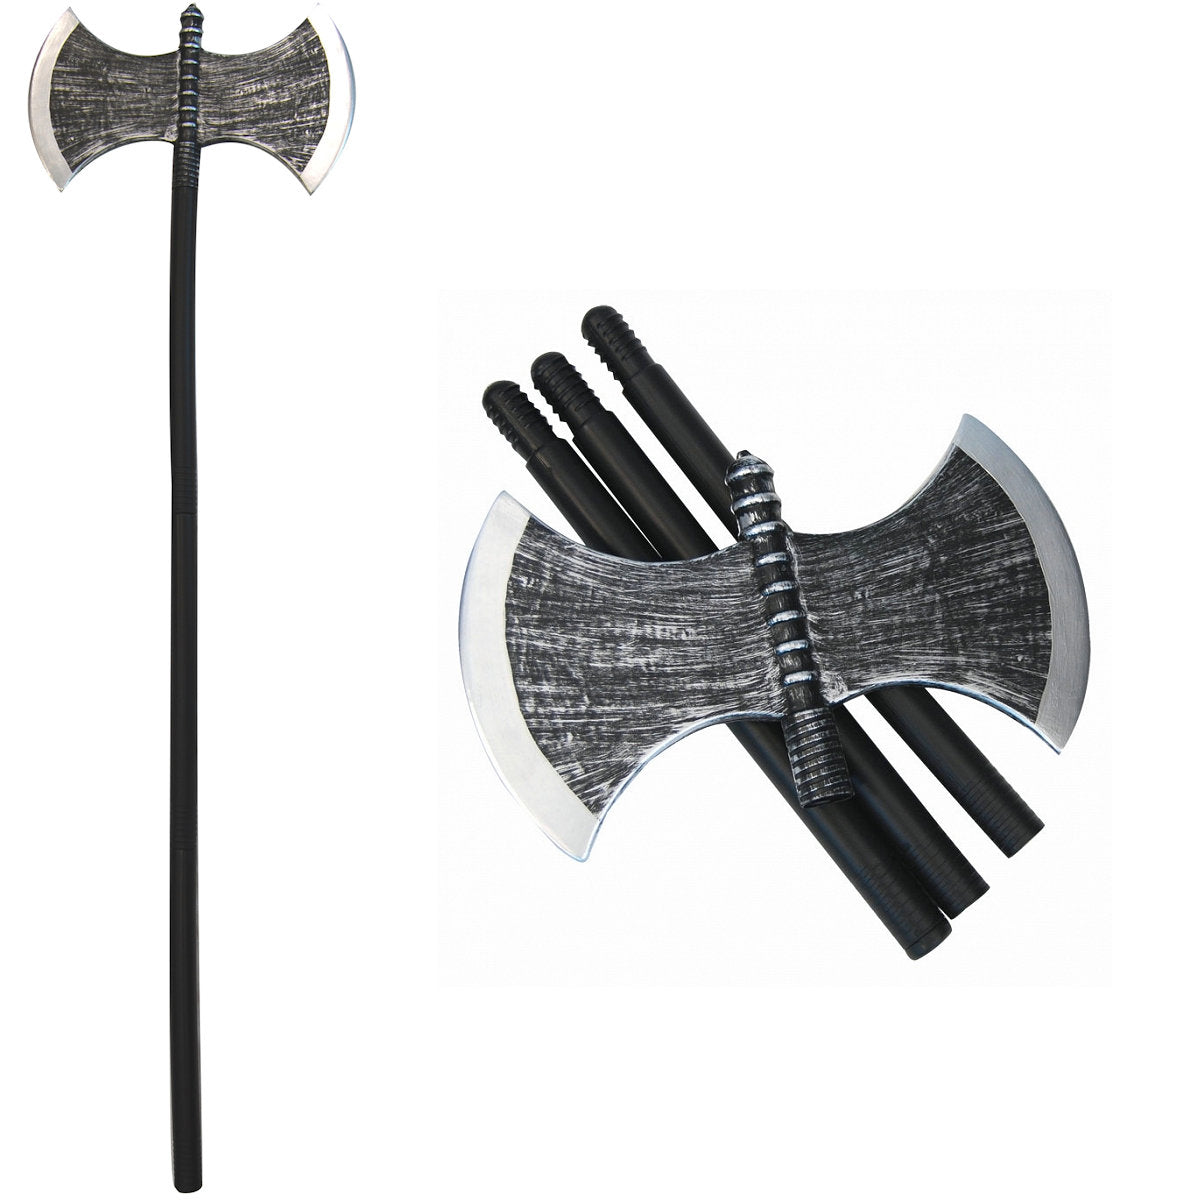 Executioner Axe Collapsible 102cm long Axe 30cm wide Costume Accessory